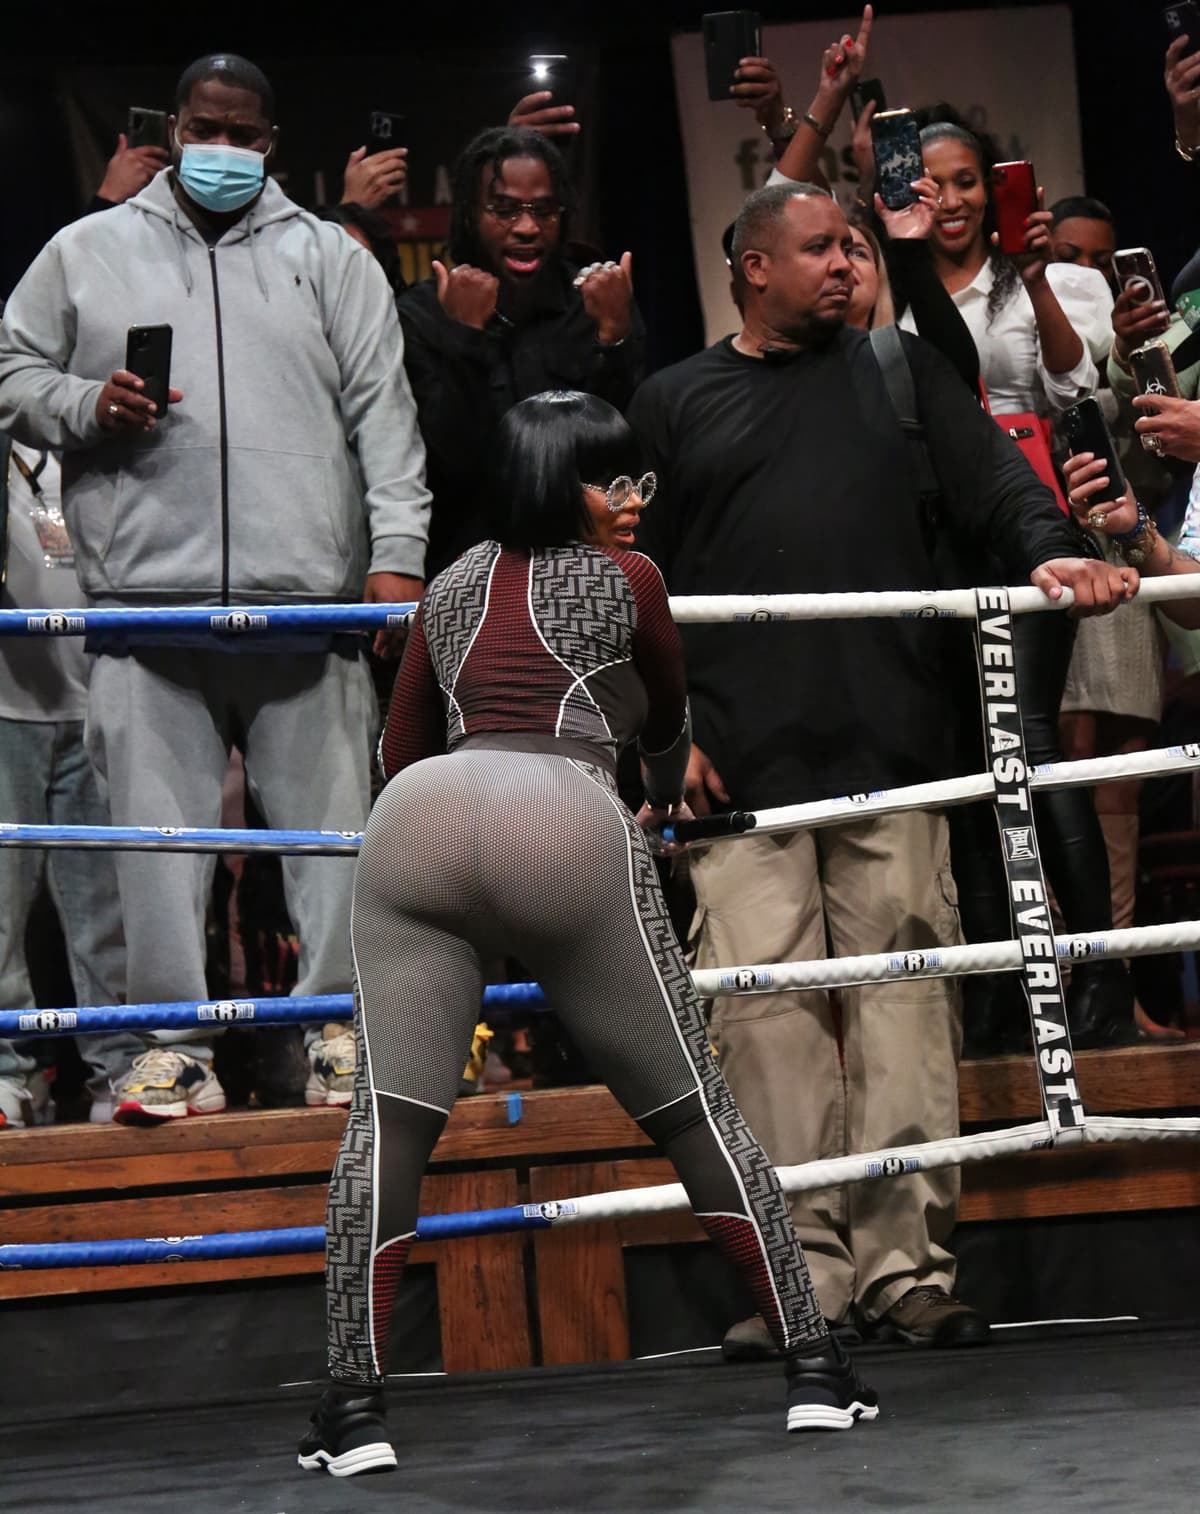 Blac Chyna says she was paid $25,000 to make an appearance at an upcoming celebrity boxing match